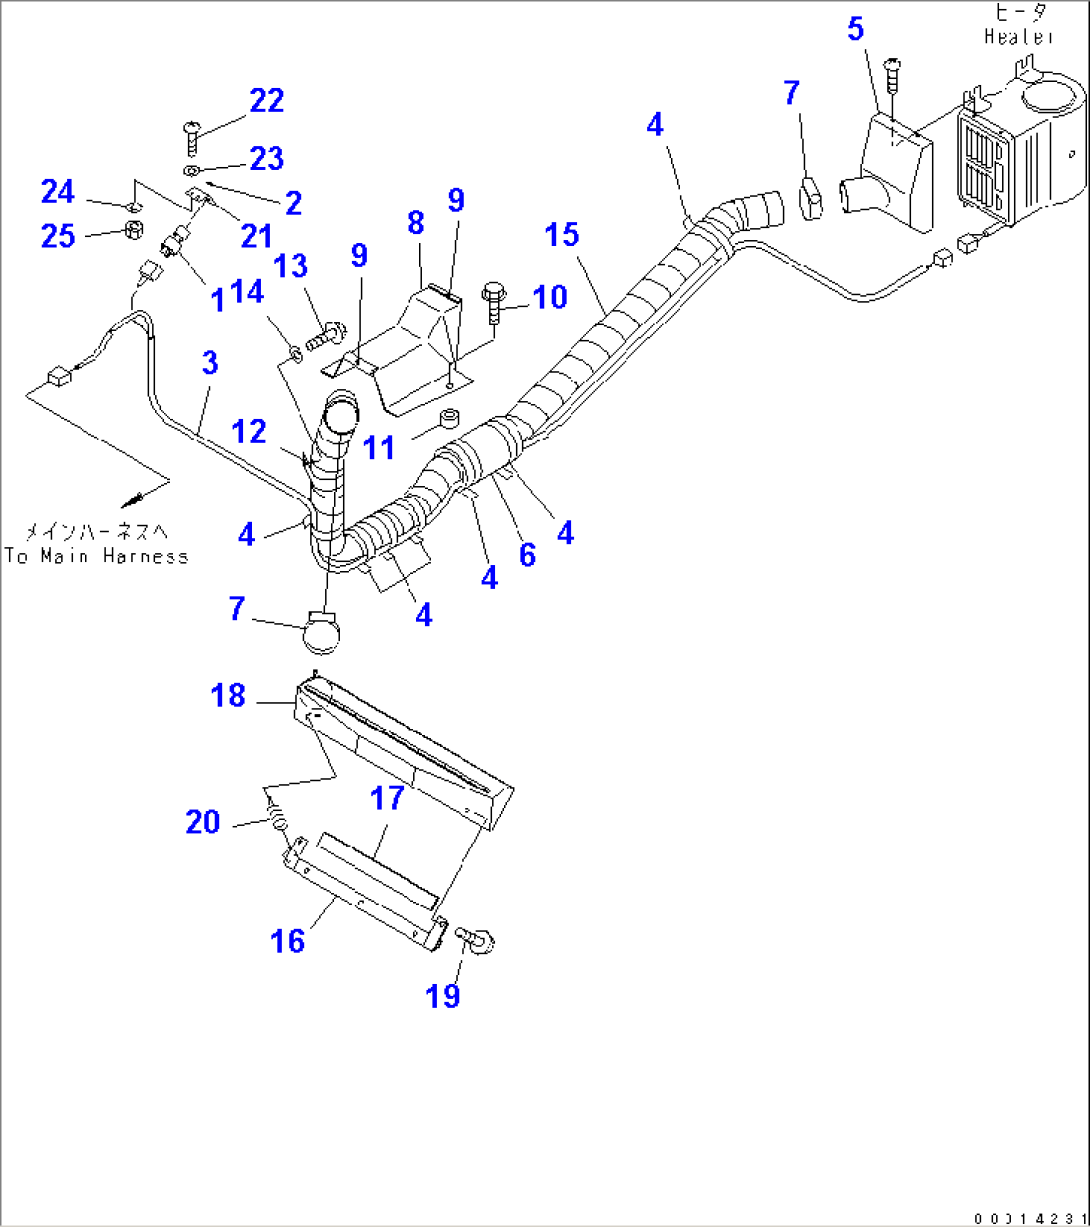 CAR HEATER AND DEFROSTER (2/3) (AIR HOSE AND WIRING) (FOR ADDITIONAL HEATER)